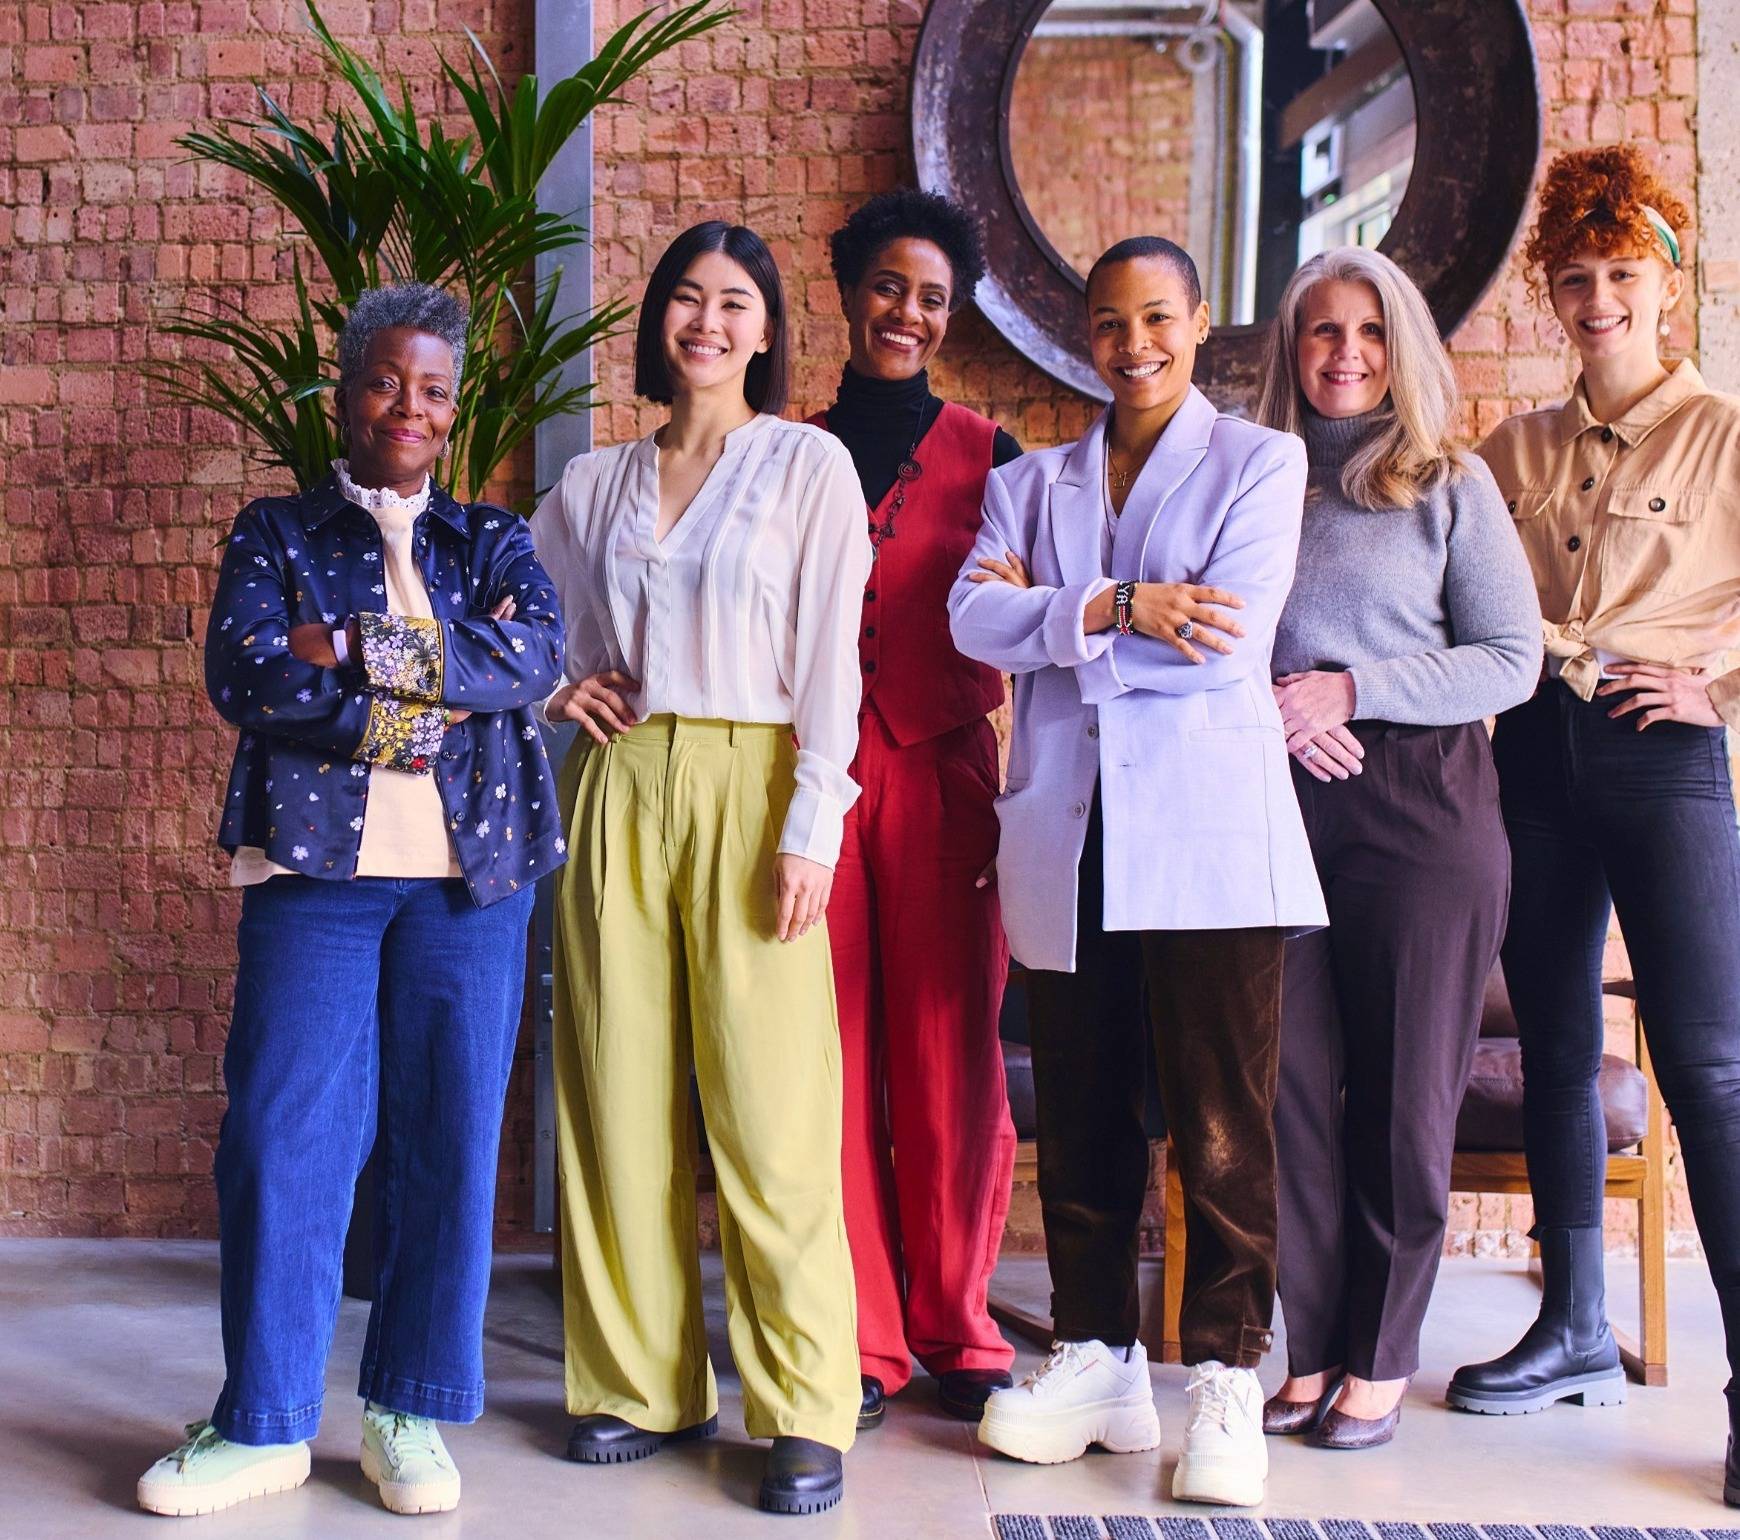 Grow your business by joining our Women-Owned Businesses community